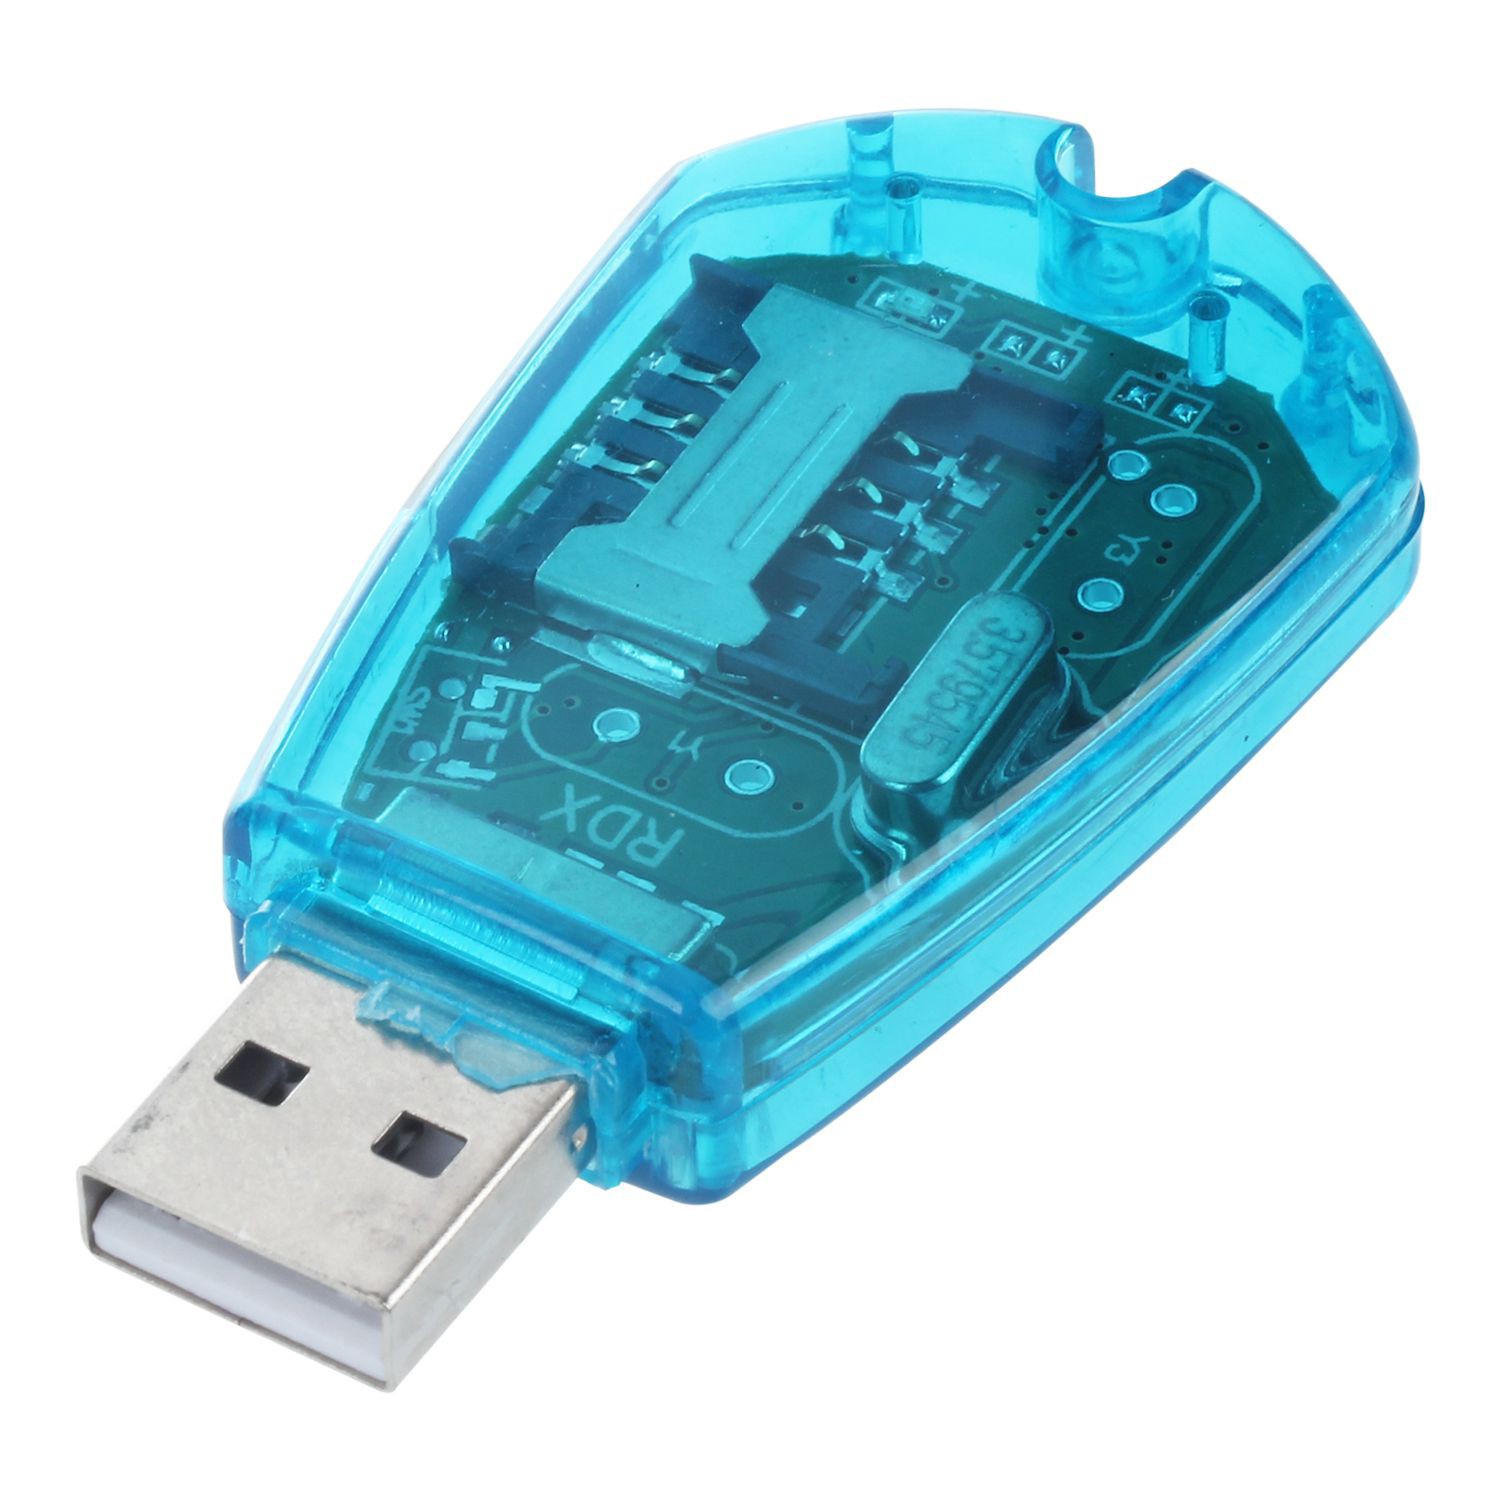  USB Cell Phone Sim Card Reader For Backup SMS to PC